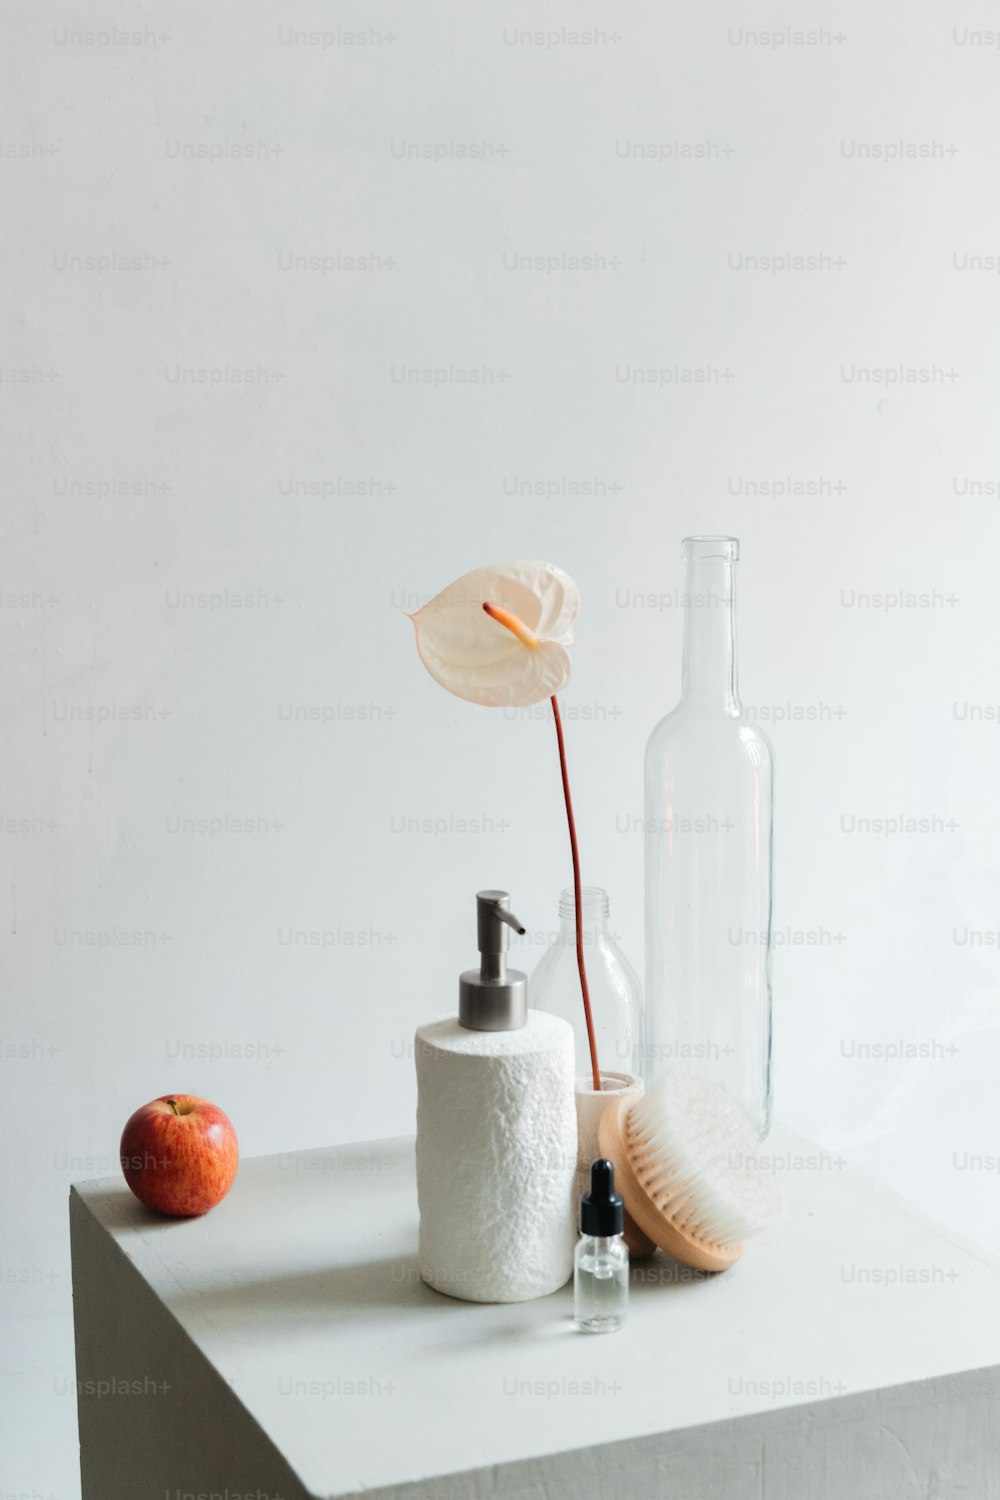 a bottle, soap dispenser, and an apple sit on a table